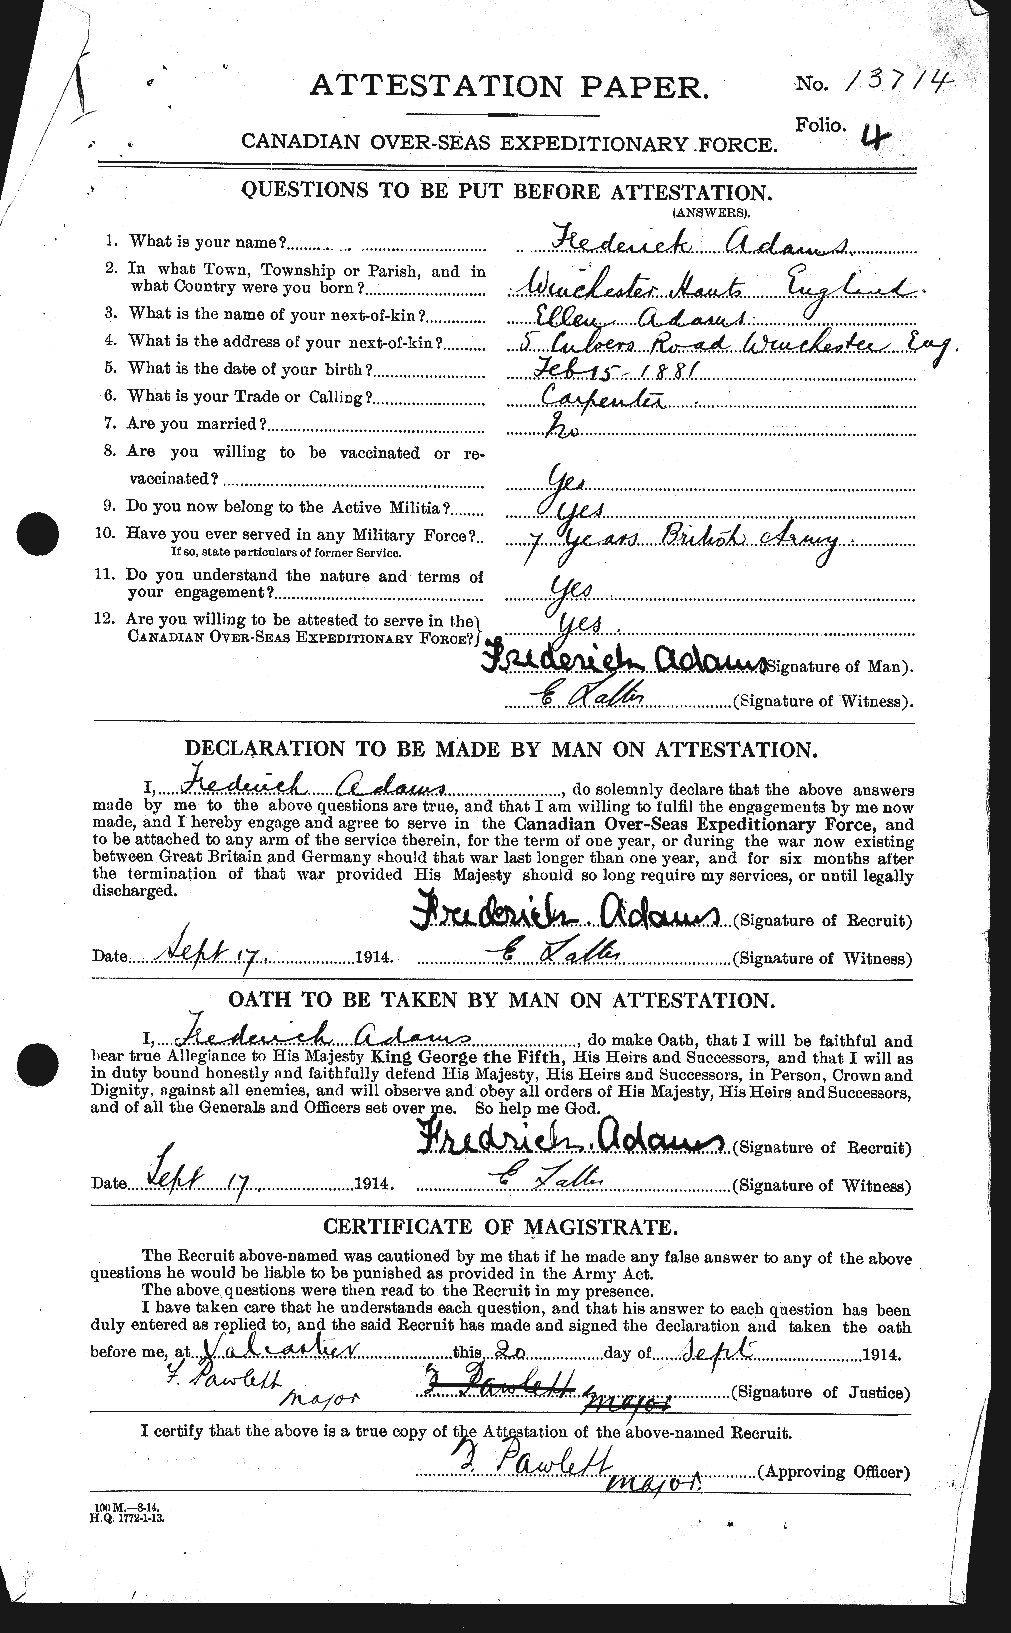 Personnel Records of the First World War - CEF 202681a